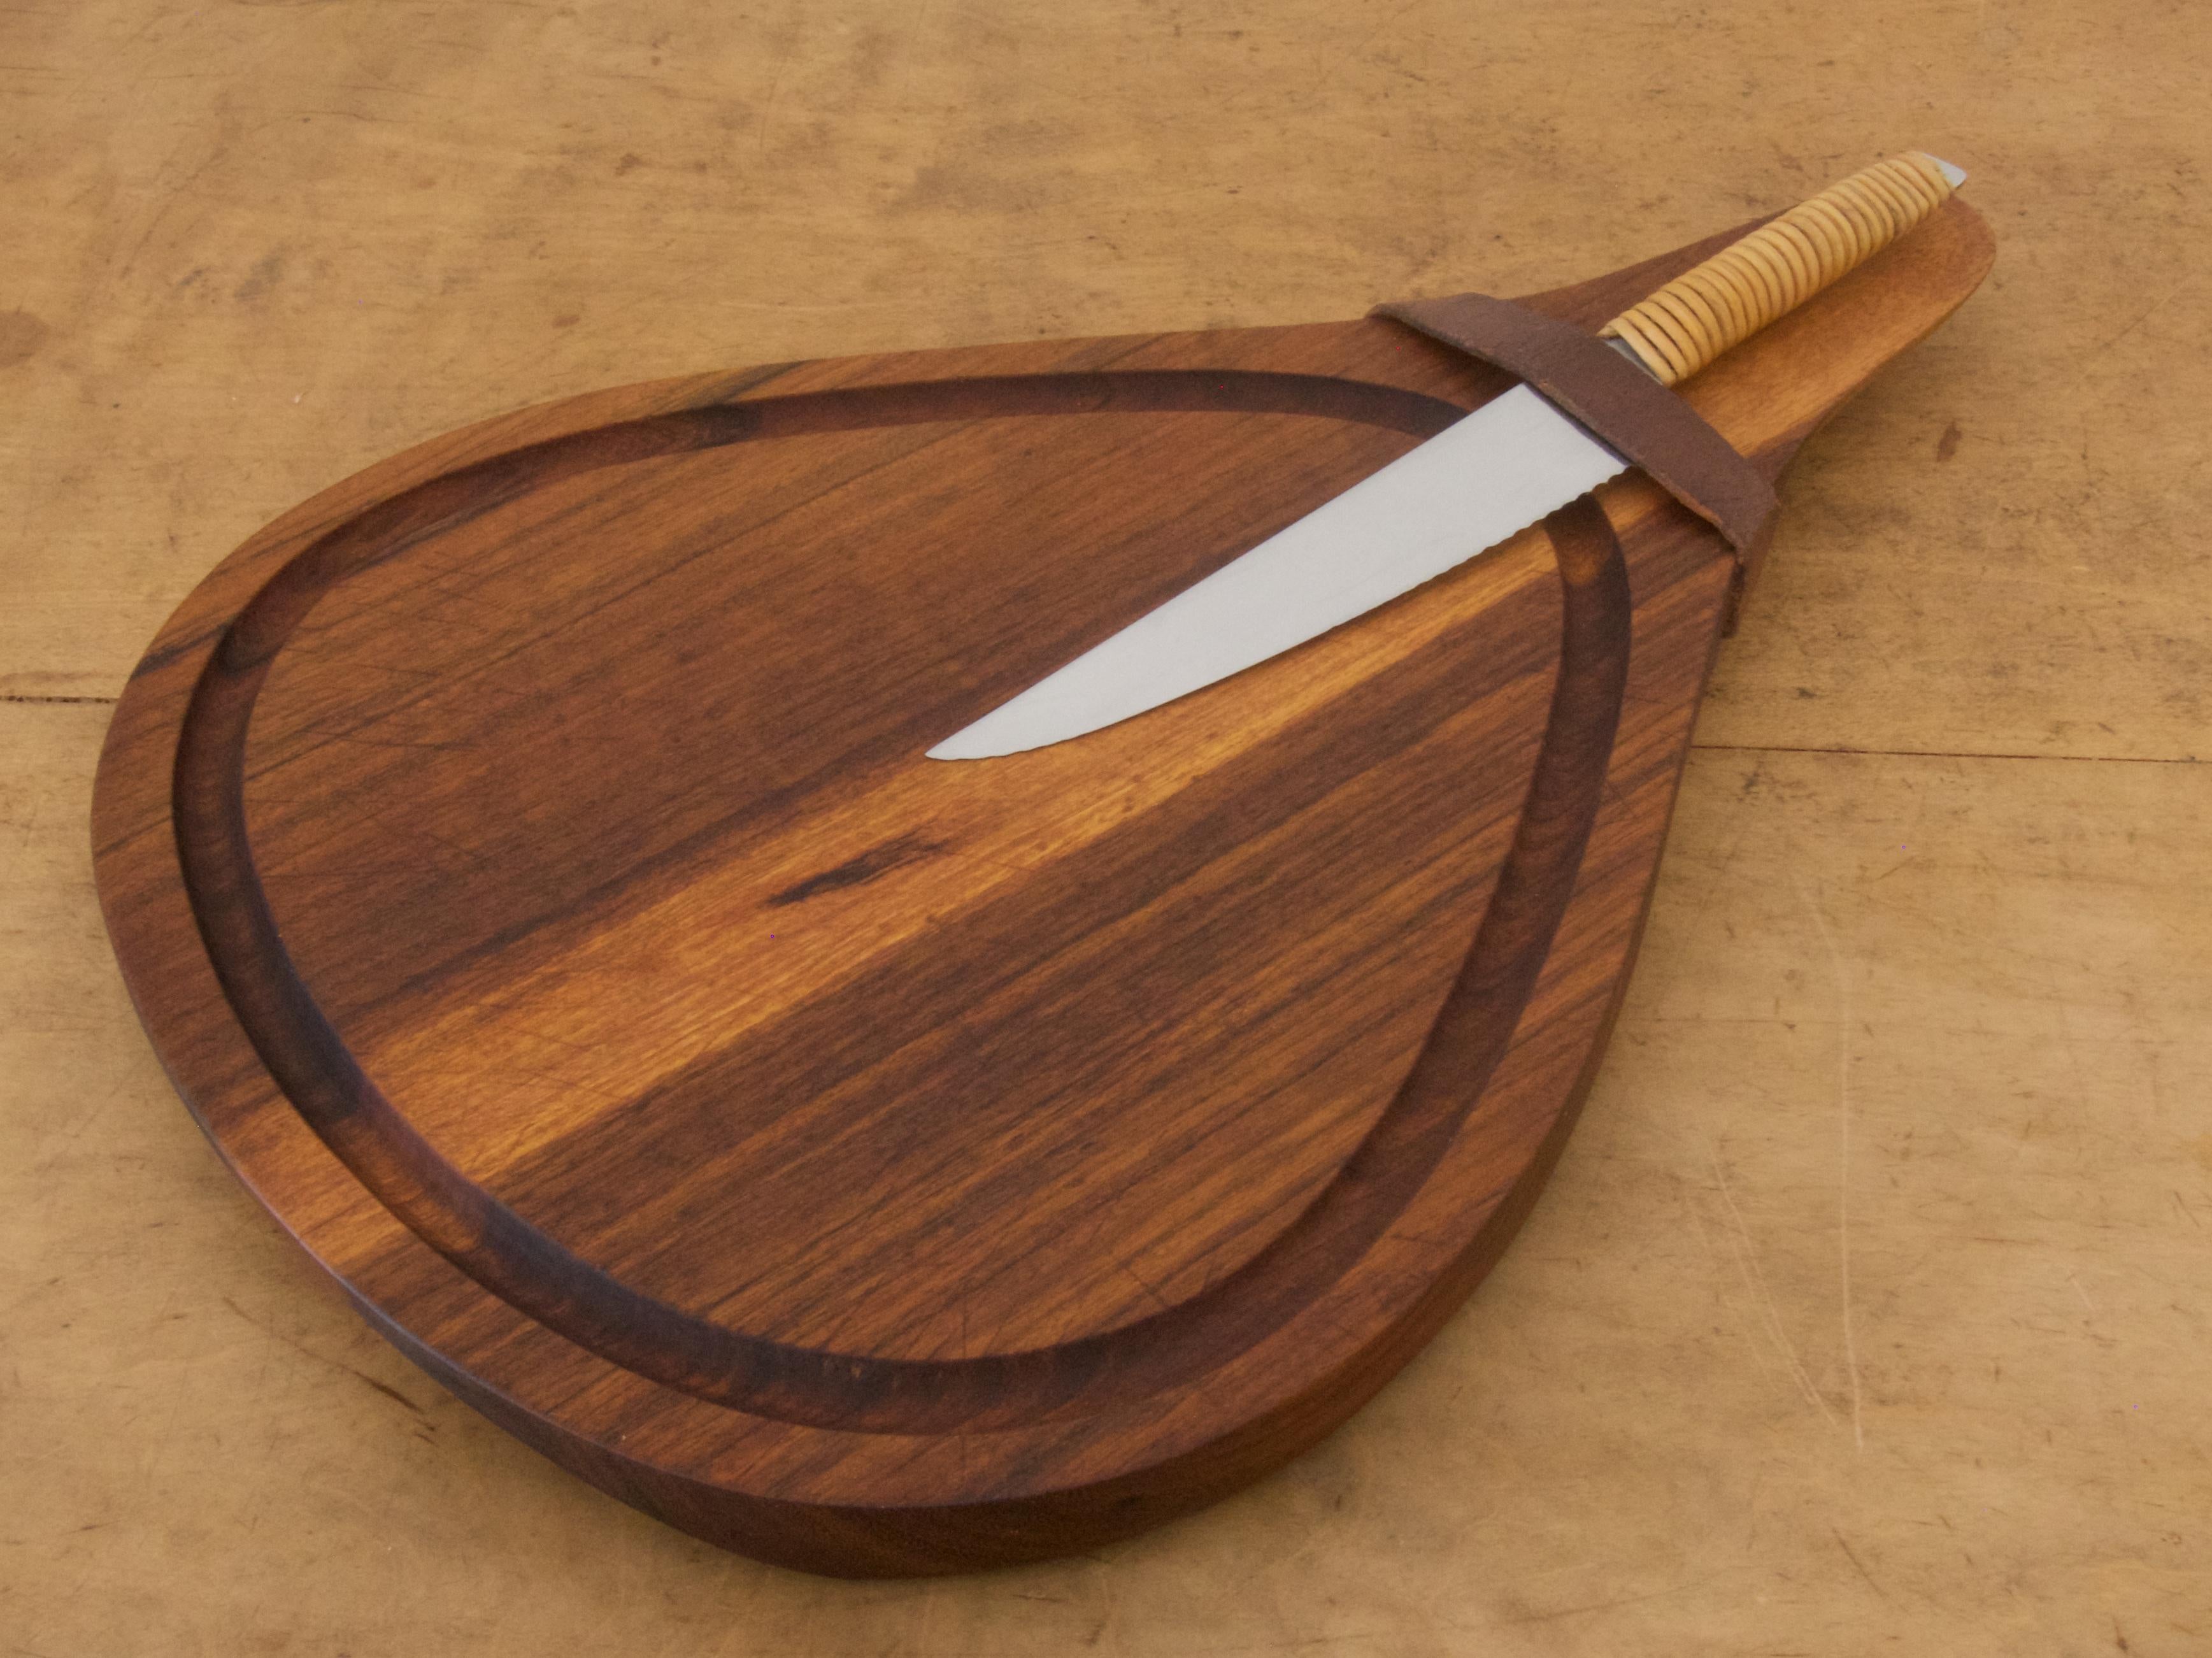 Beautiful cutting board with a knife designed in the 1950s by Carl Auböck

Nutwood board with a leather strap, stainless steel knife with a wicker handle
The knife is marked with the AMBOSS logo, AUBÖCK, STAINLESS and MADE IN